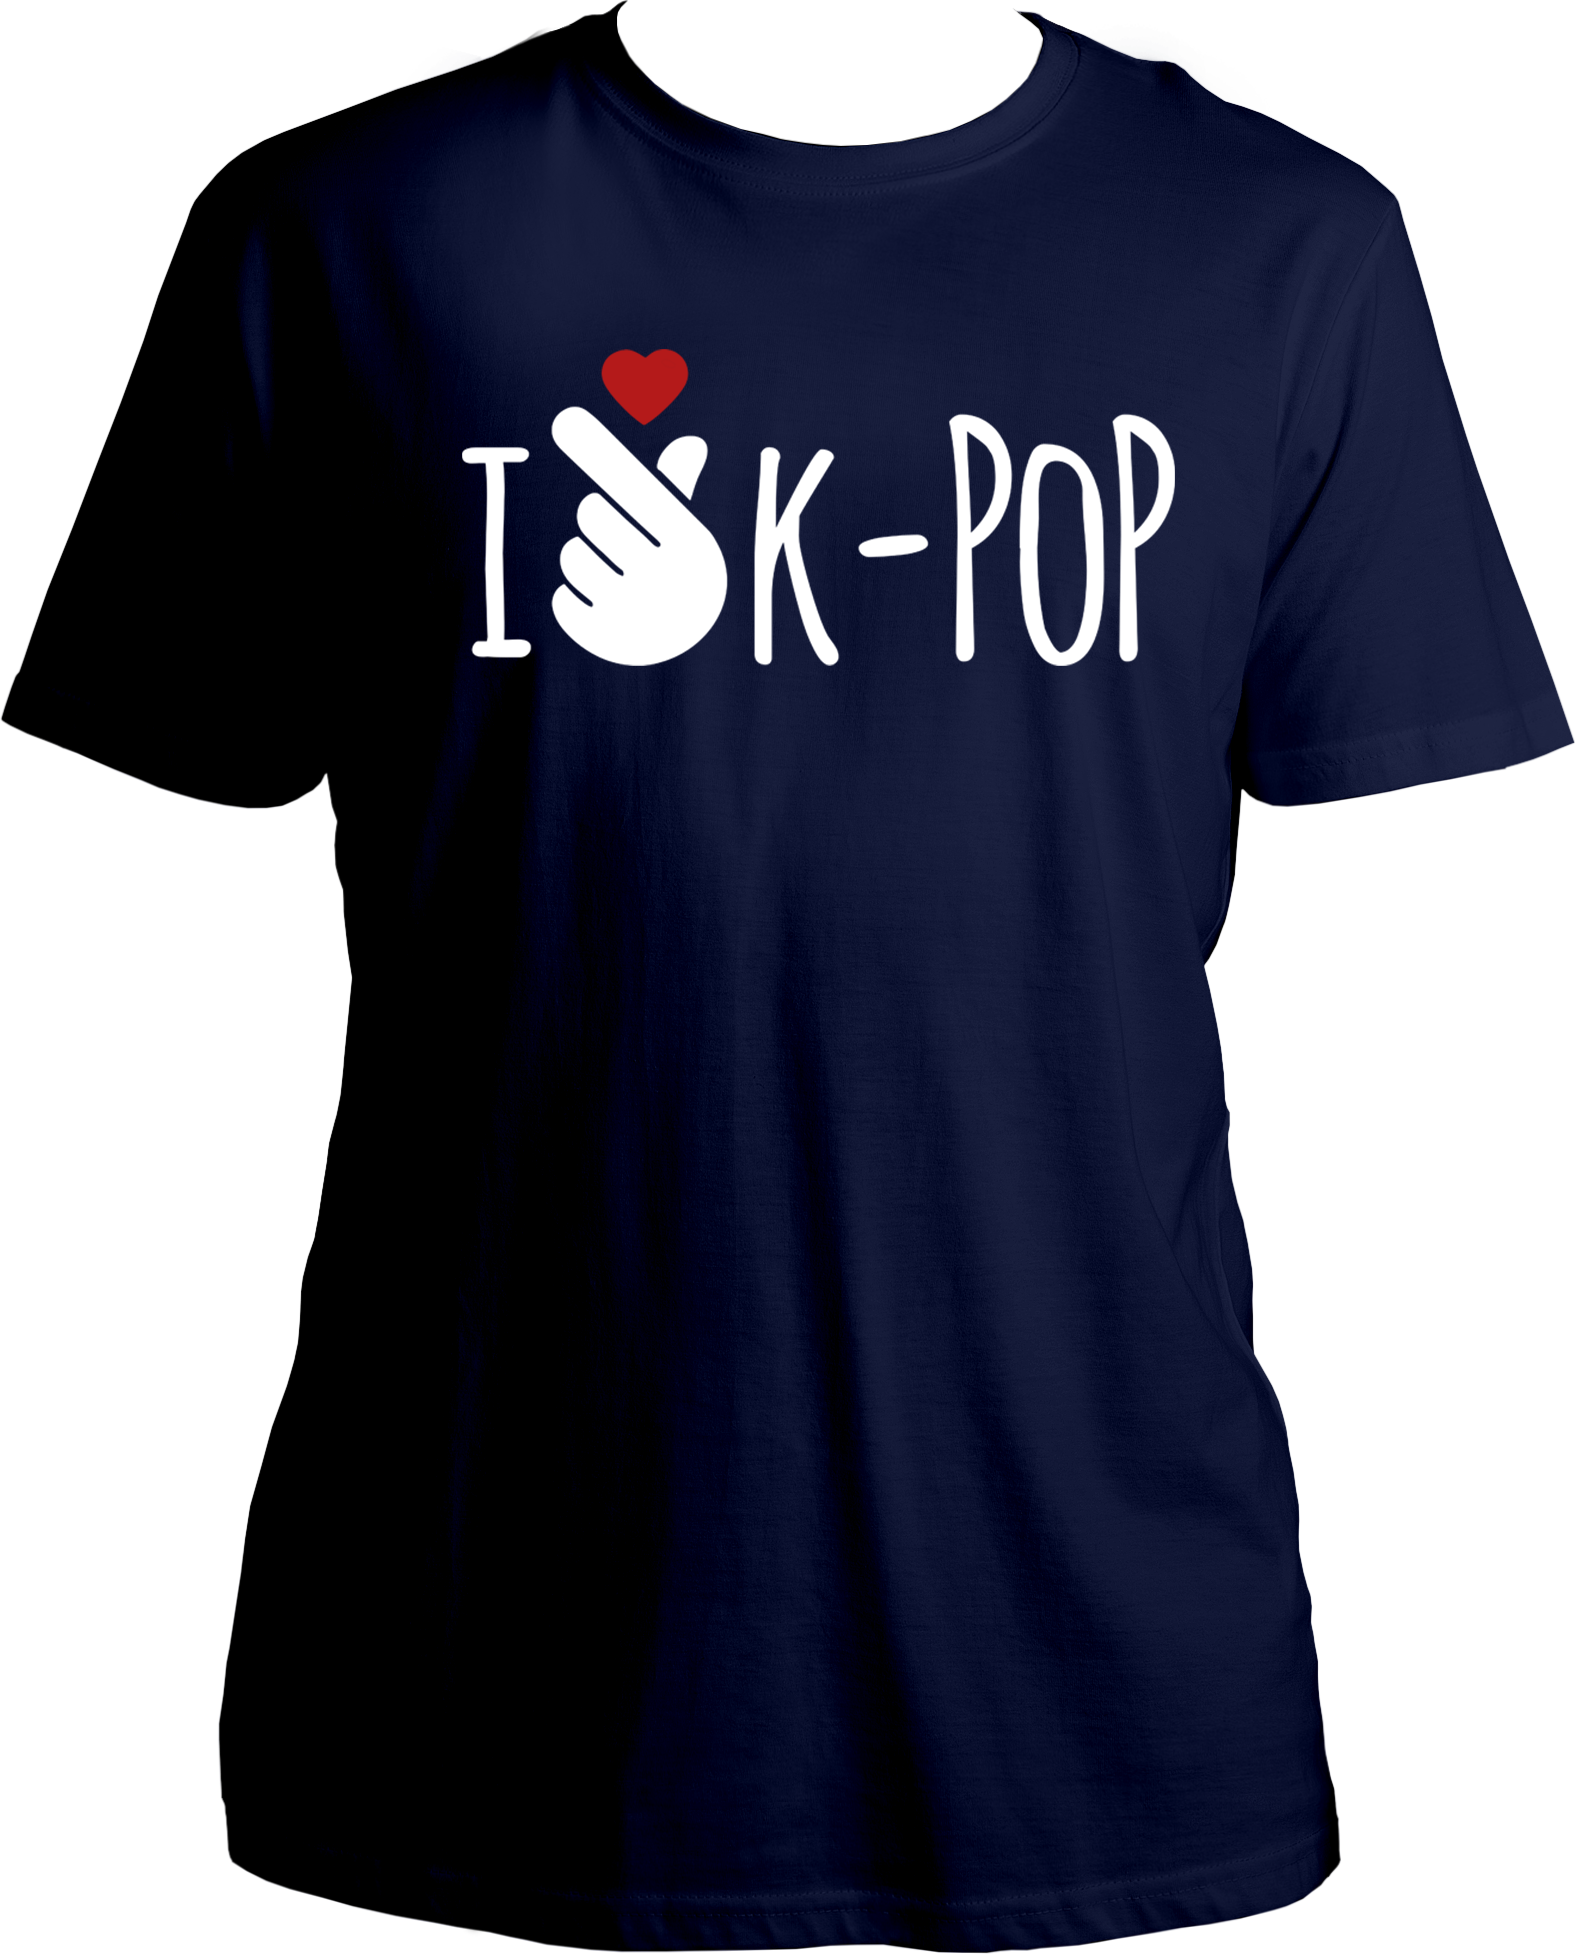 Get ready to show off your love for K-POP with our unisex t-shirts! Made from 100% cotton, these shirts are perfect for any k-pop fan. Get your groove on with happy vibes while enjoying your favorite k-pop music. Get yours now and spread the love for k-pop in style! #kop #kpoptshirts